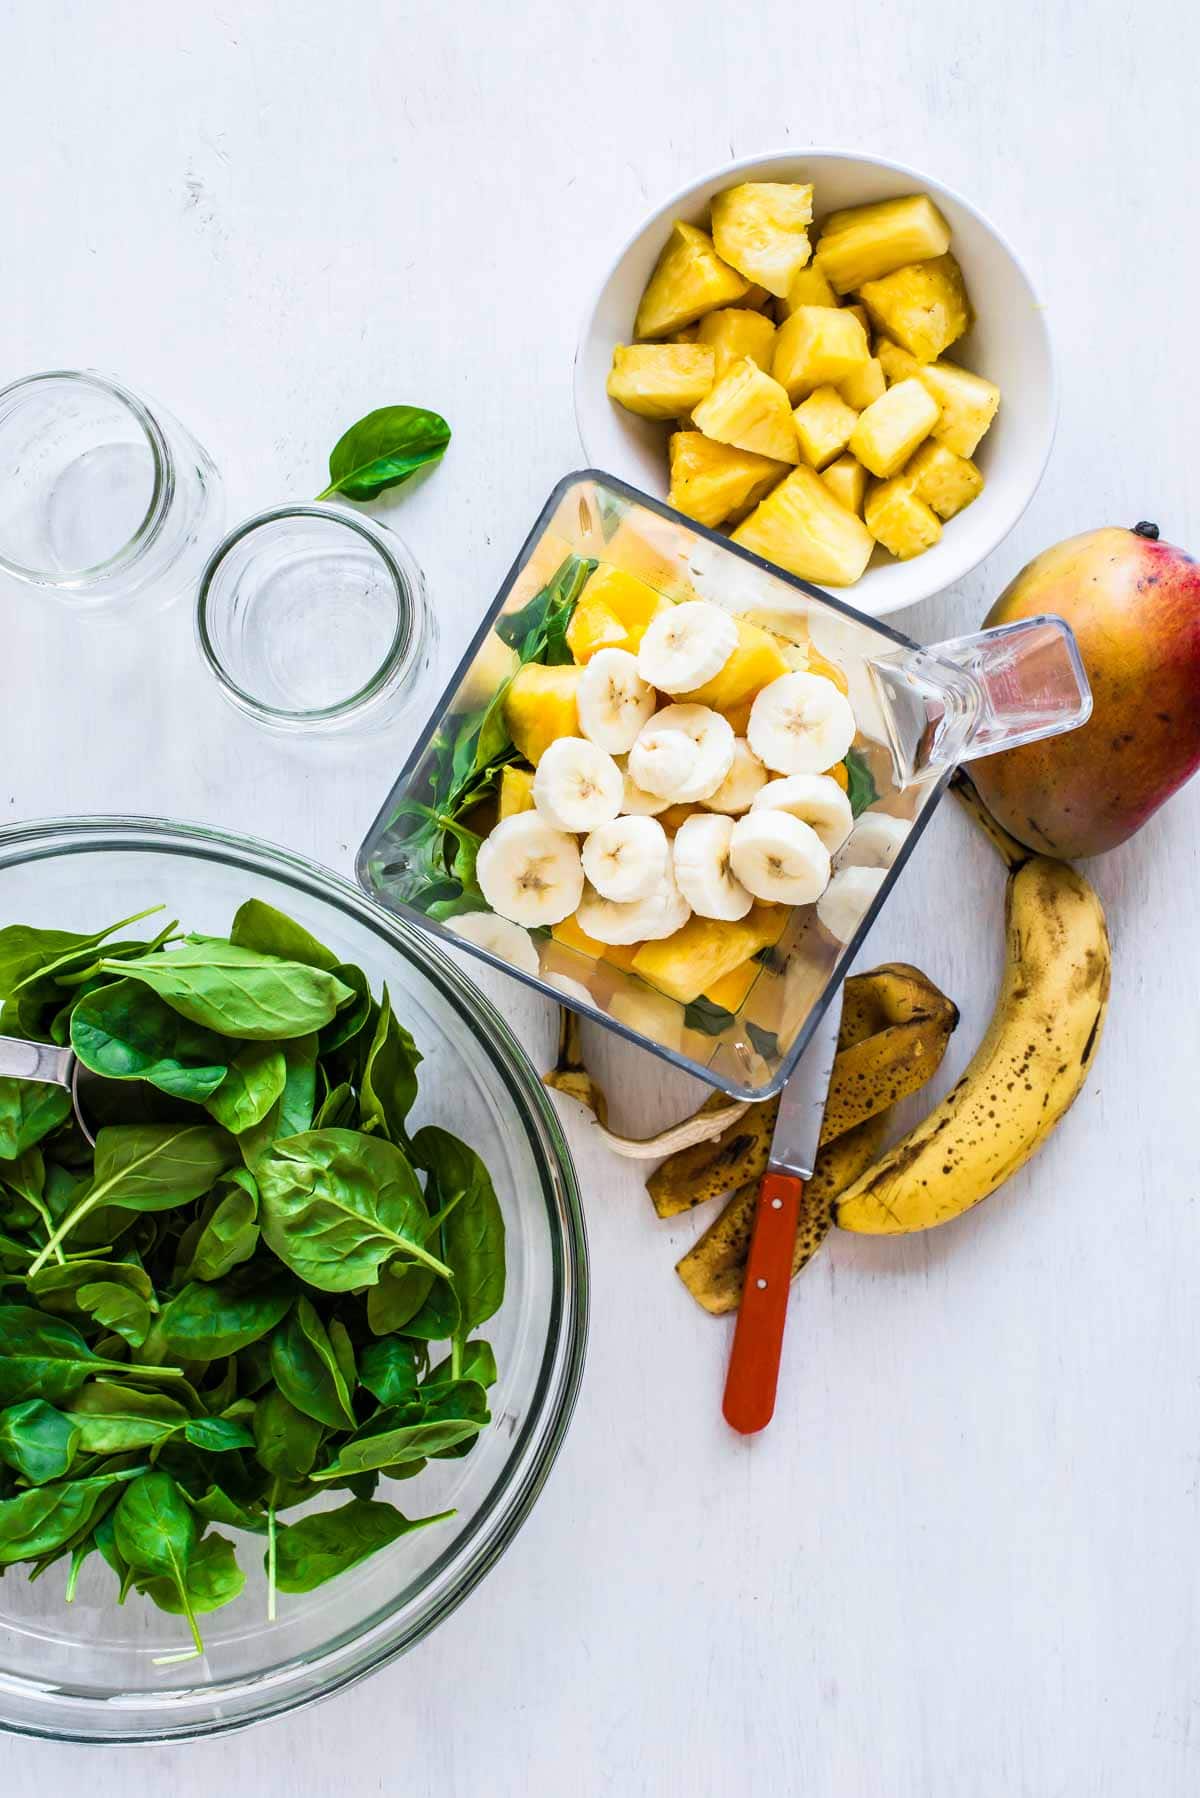 5 ingredients to make a spinach smoothie